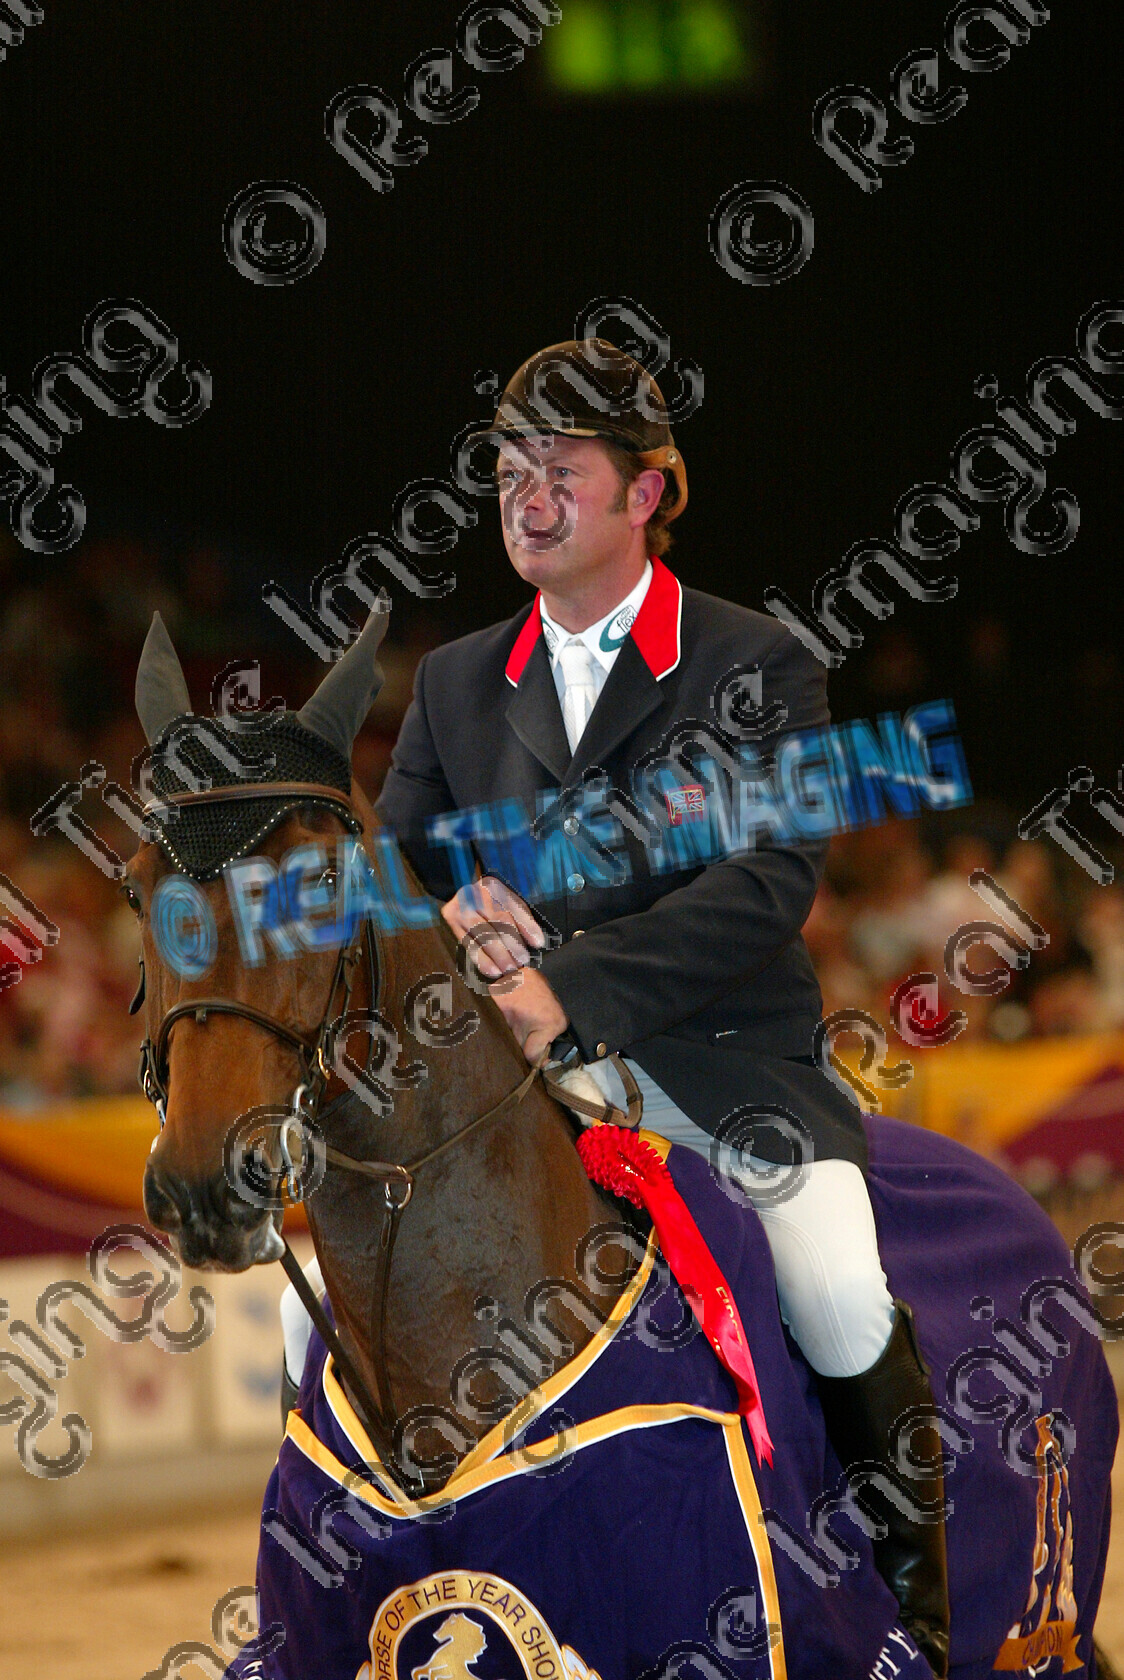 S05-67-T5-038 
 HOYS 2005: The Xerox Special Event Services Cup winner 
 Keywords: horse of the year show 2005 05 hoys saturday 15 10 october standing presentation rug trophy rosette showjumping showjumper